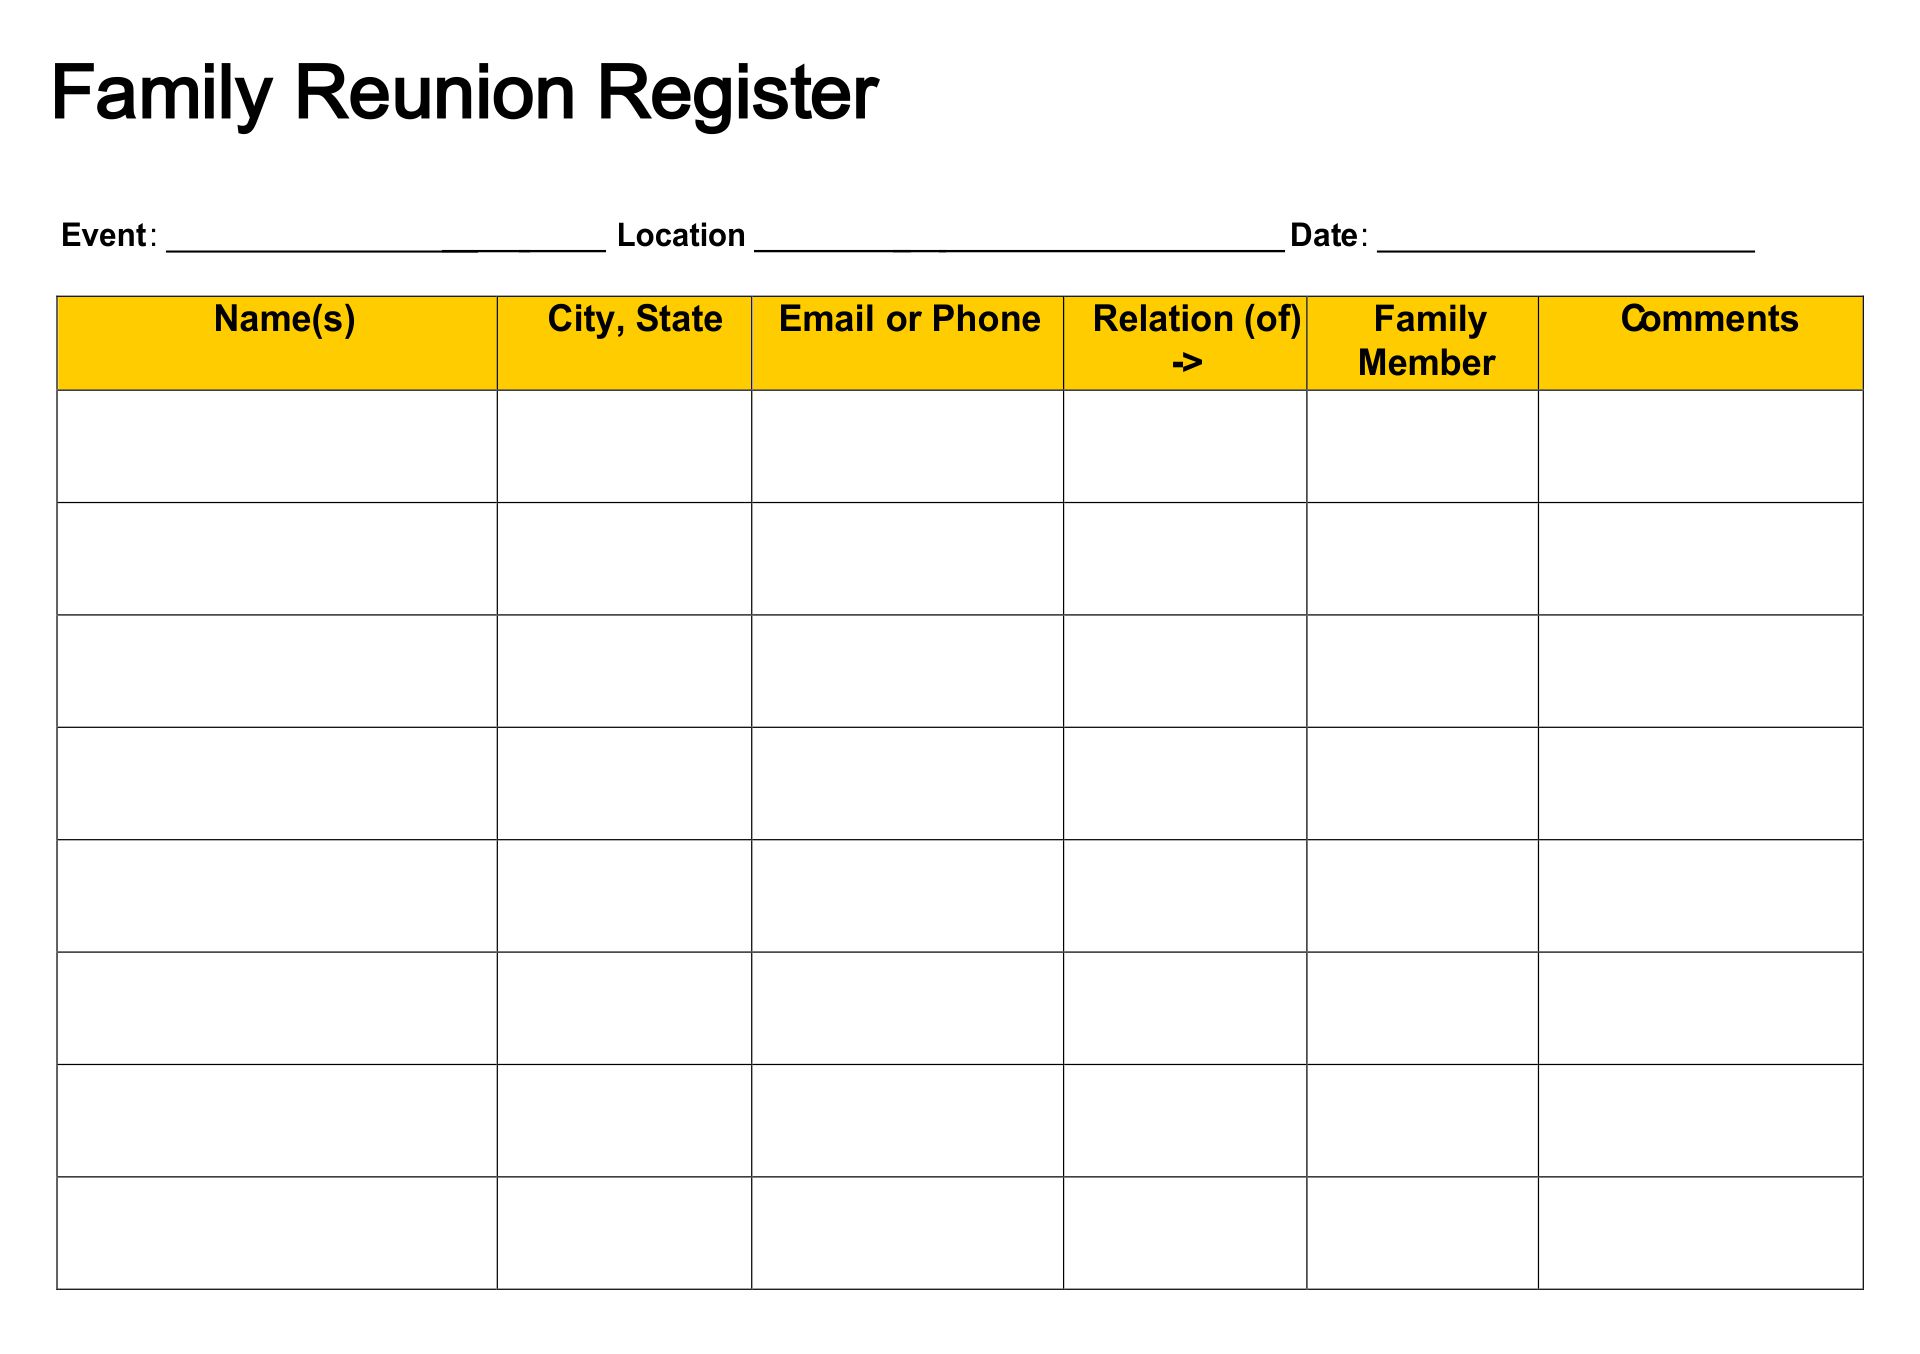 7-best-images-of-family-reunion-forms-printable-free-printable-family